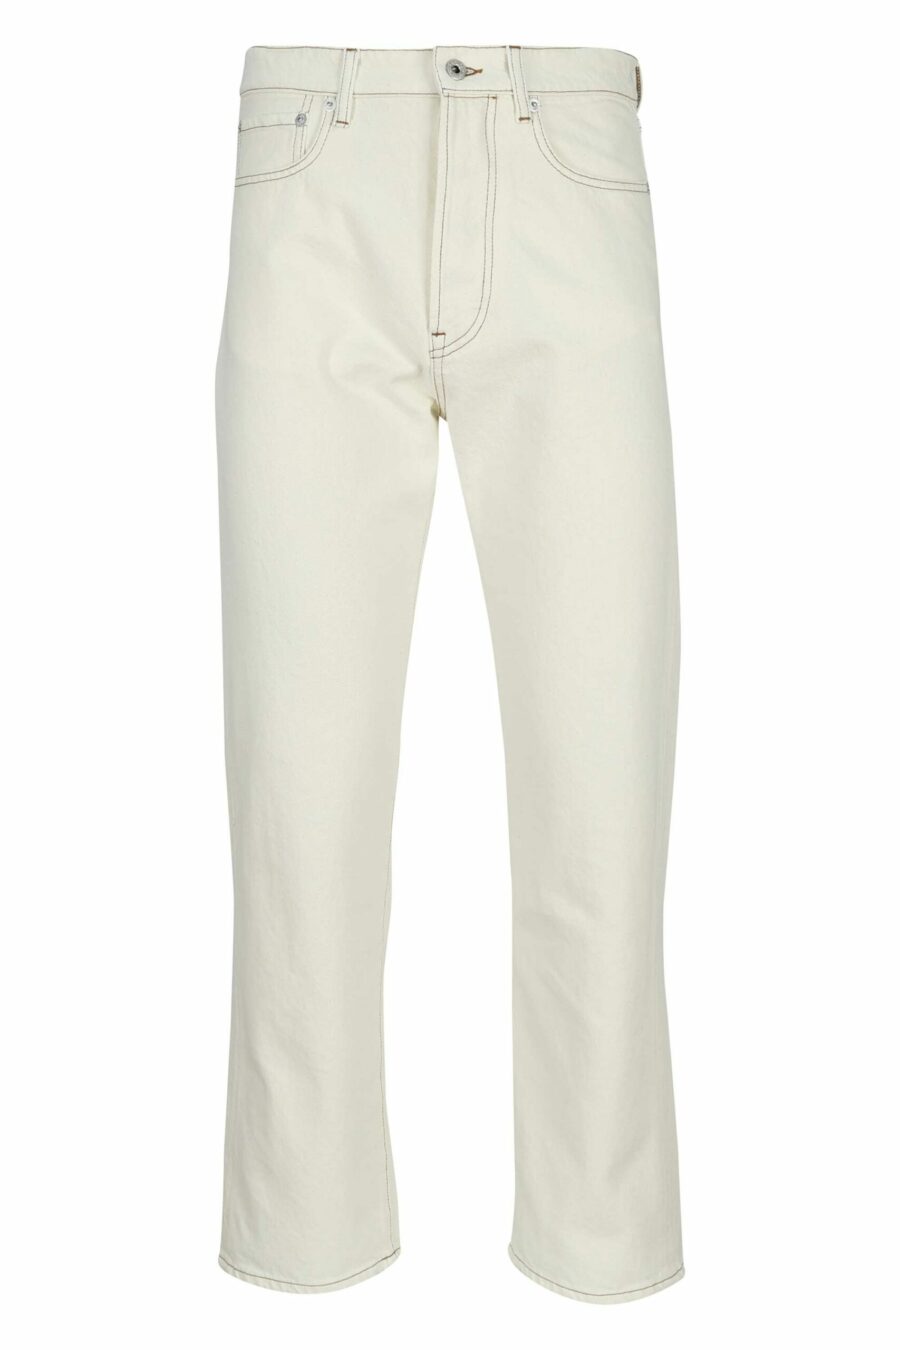 White jeans with "k" logo - 3612230591813 scaled